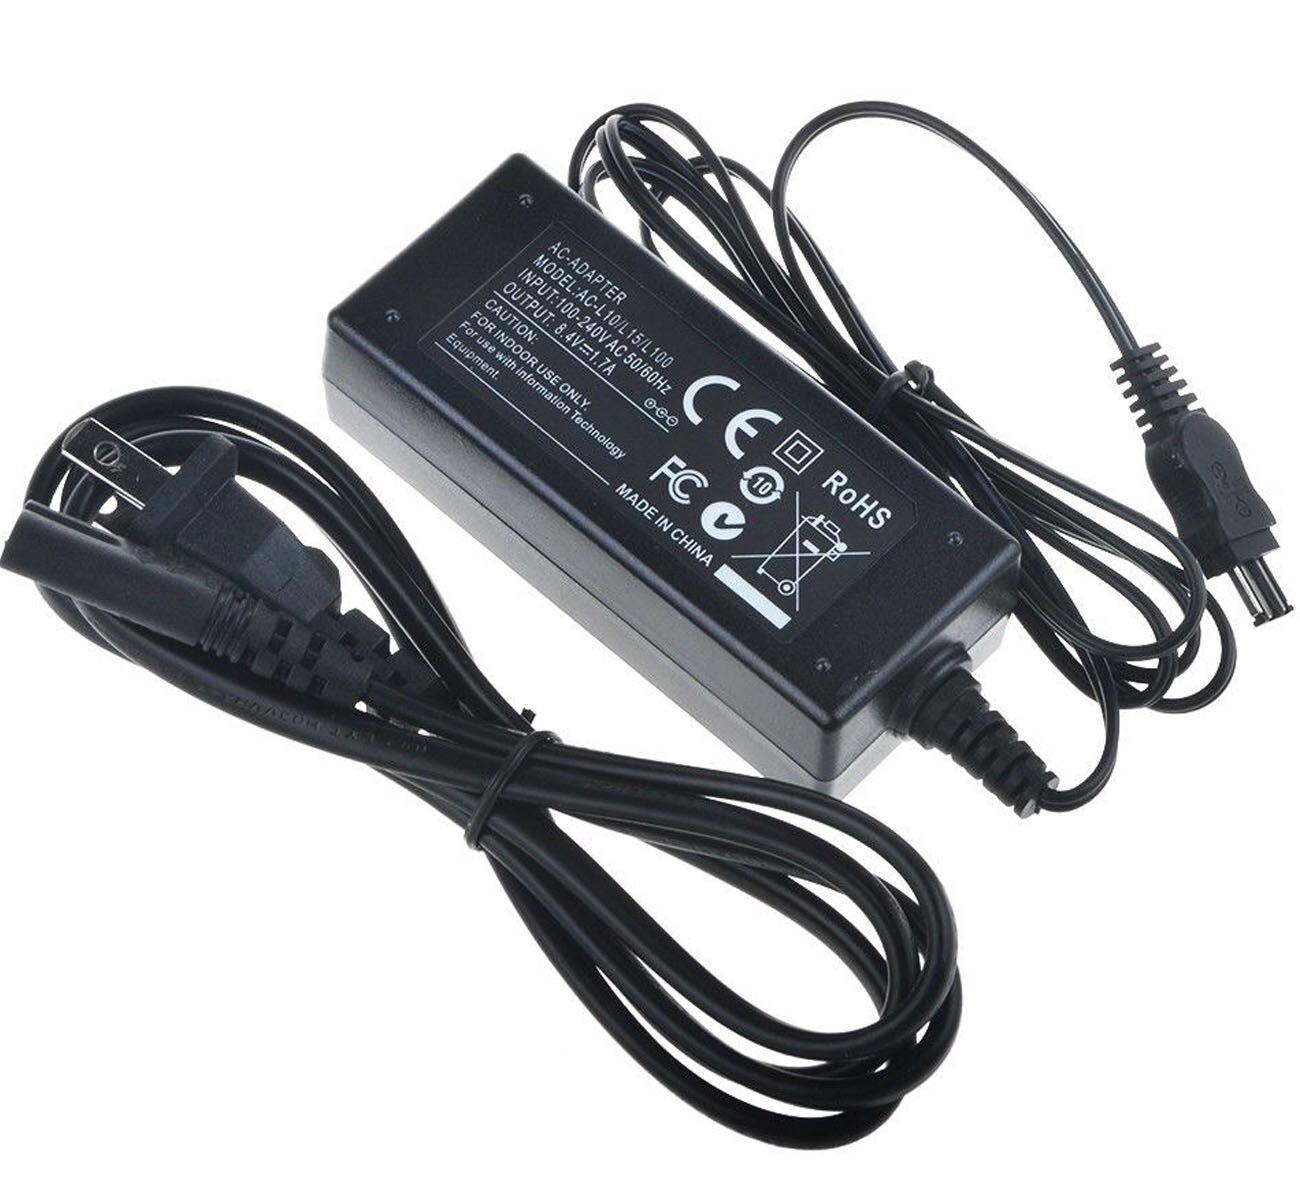 Ac Power Adapter Oplader Voor Sony DCR-TRV310E, DCR-TRV410E, DCR-TRV420E, DCR-TRV430E, DCR-TRV460E, DCR-TRV480E Handycam Camcorder